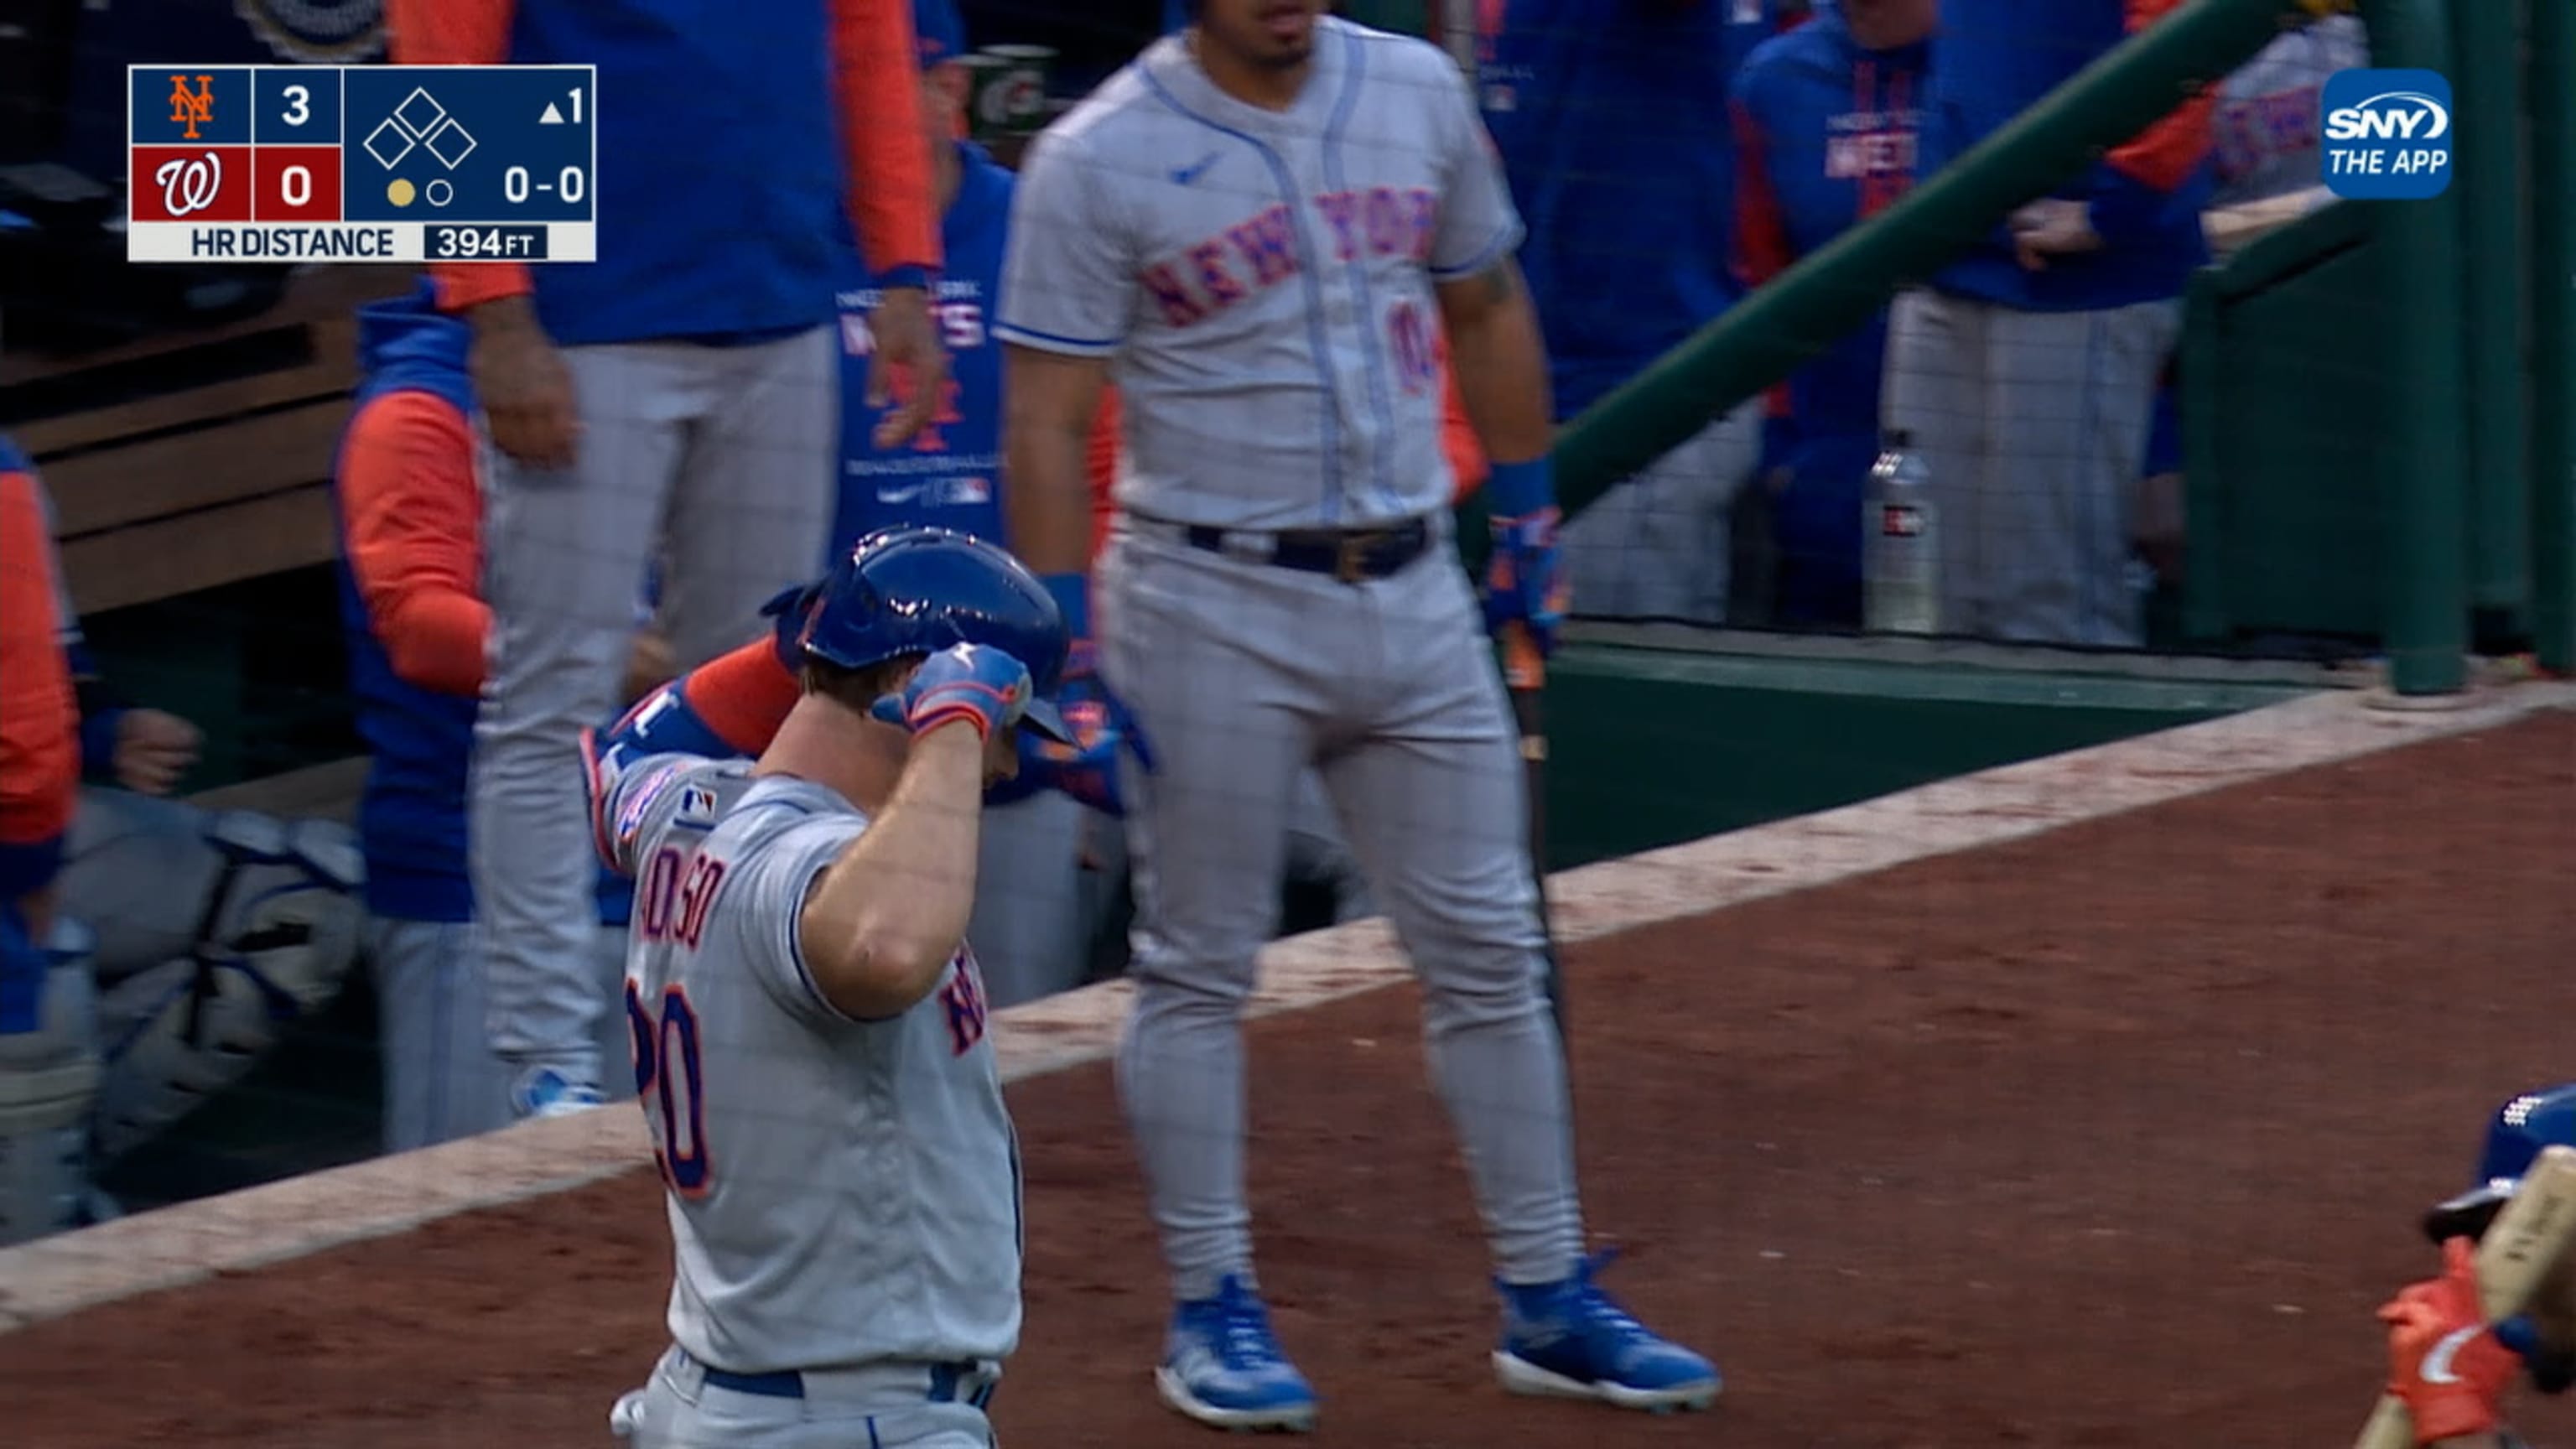 Pete Alonso's two-run homer